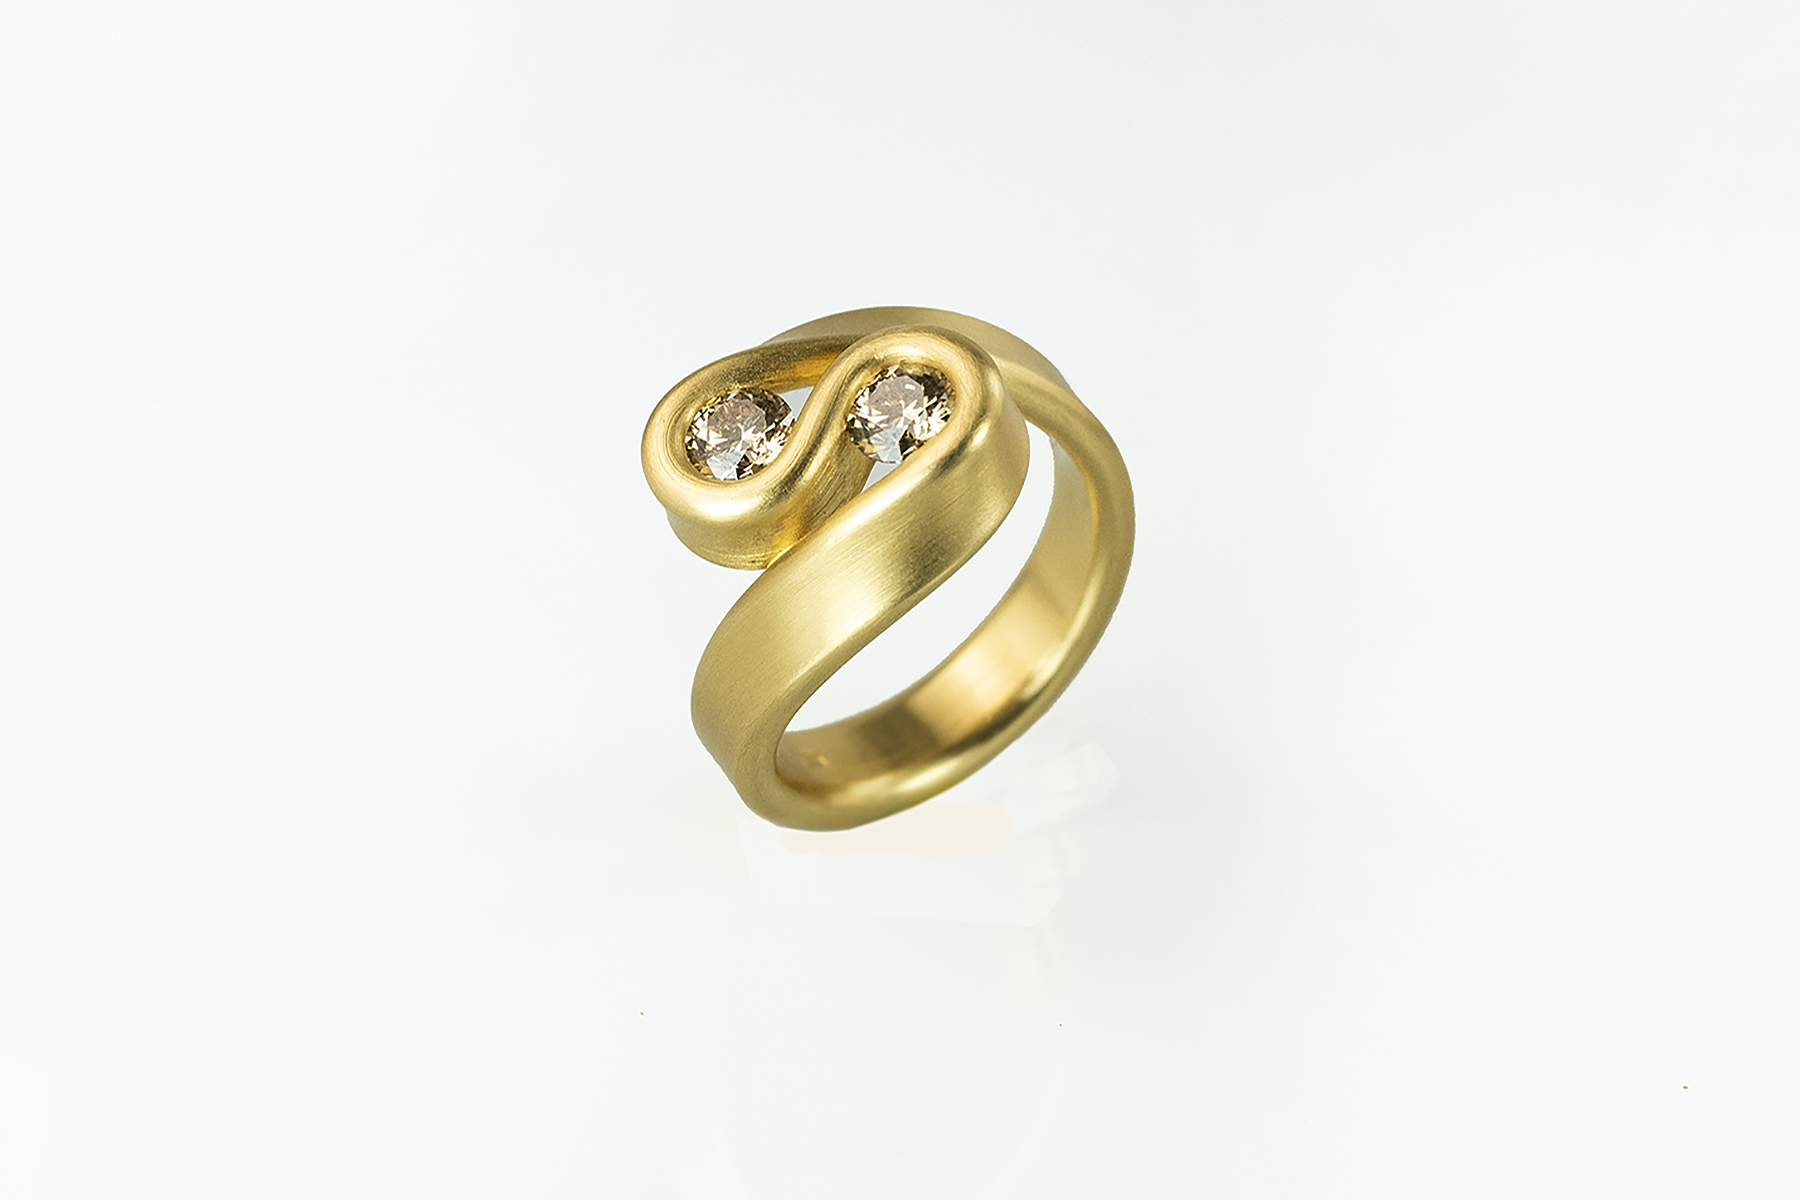 Isabella Hund Gallery for Contemporary Jewellery GALLERY FOR